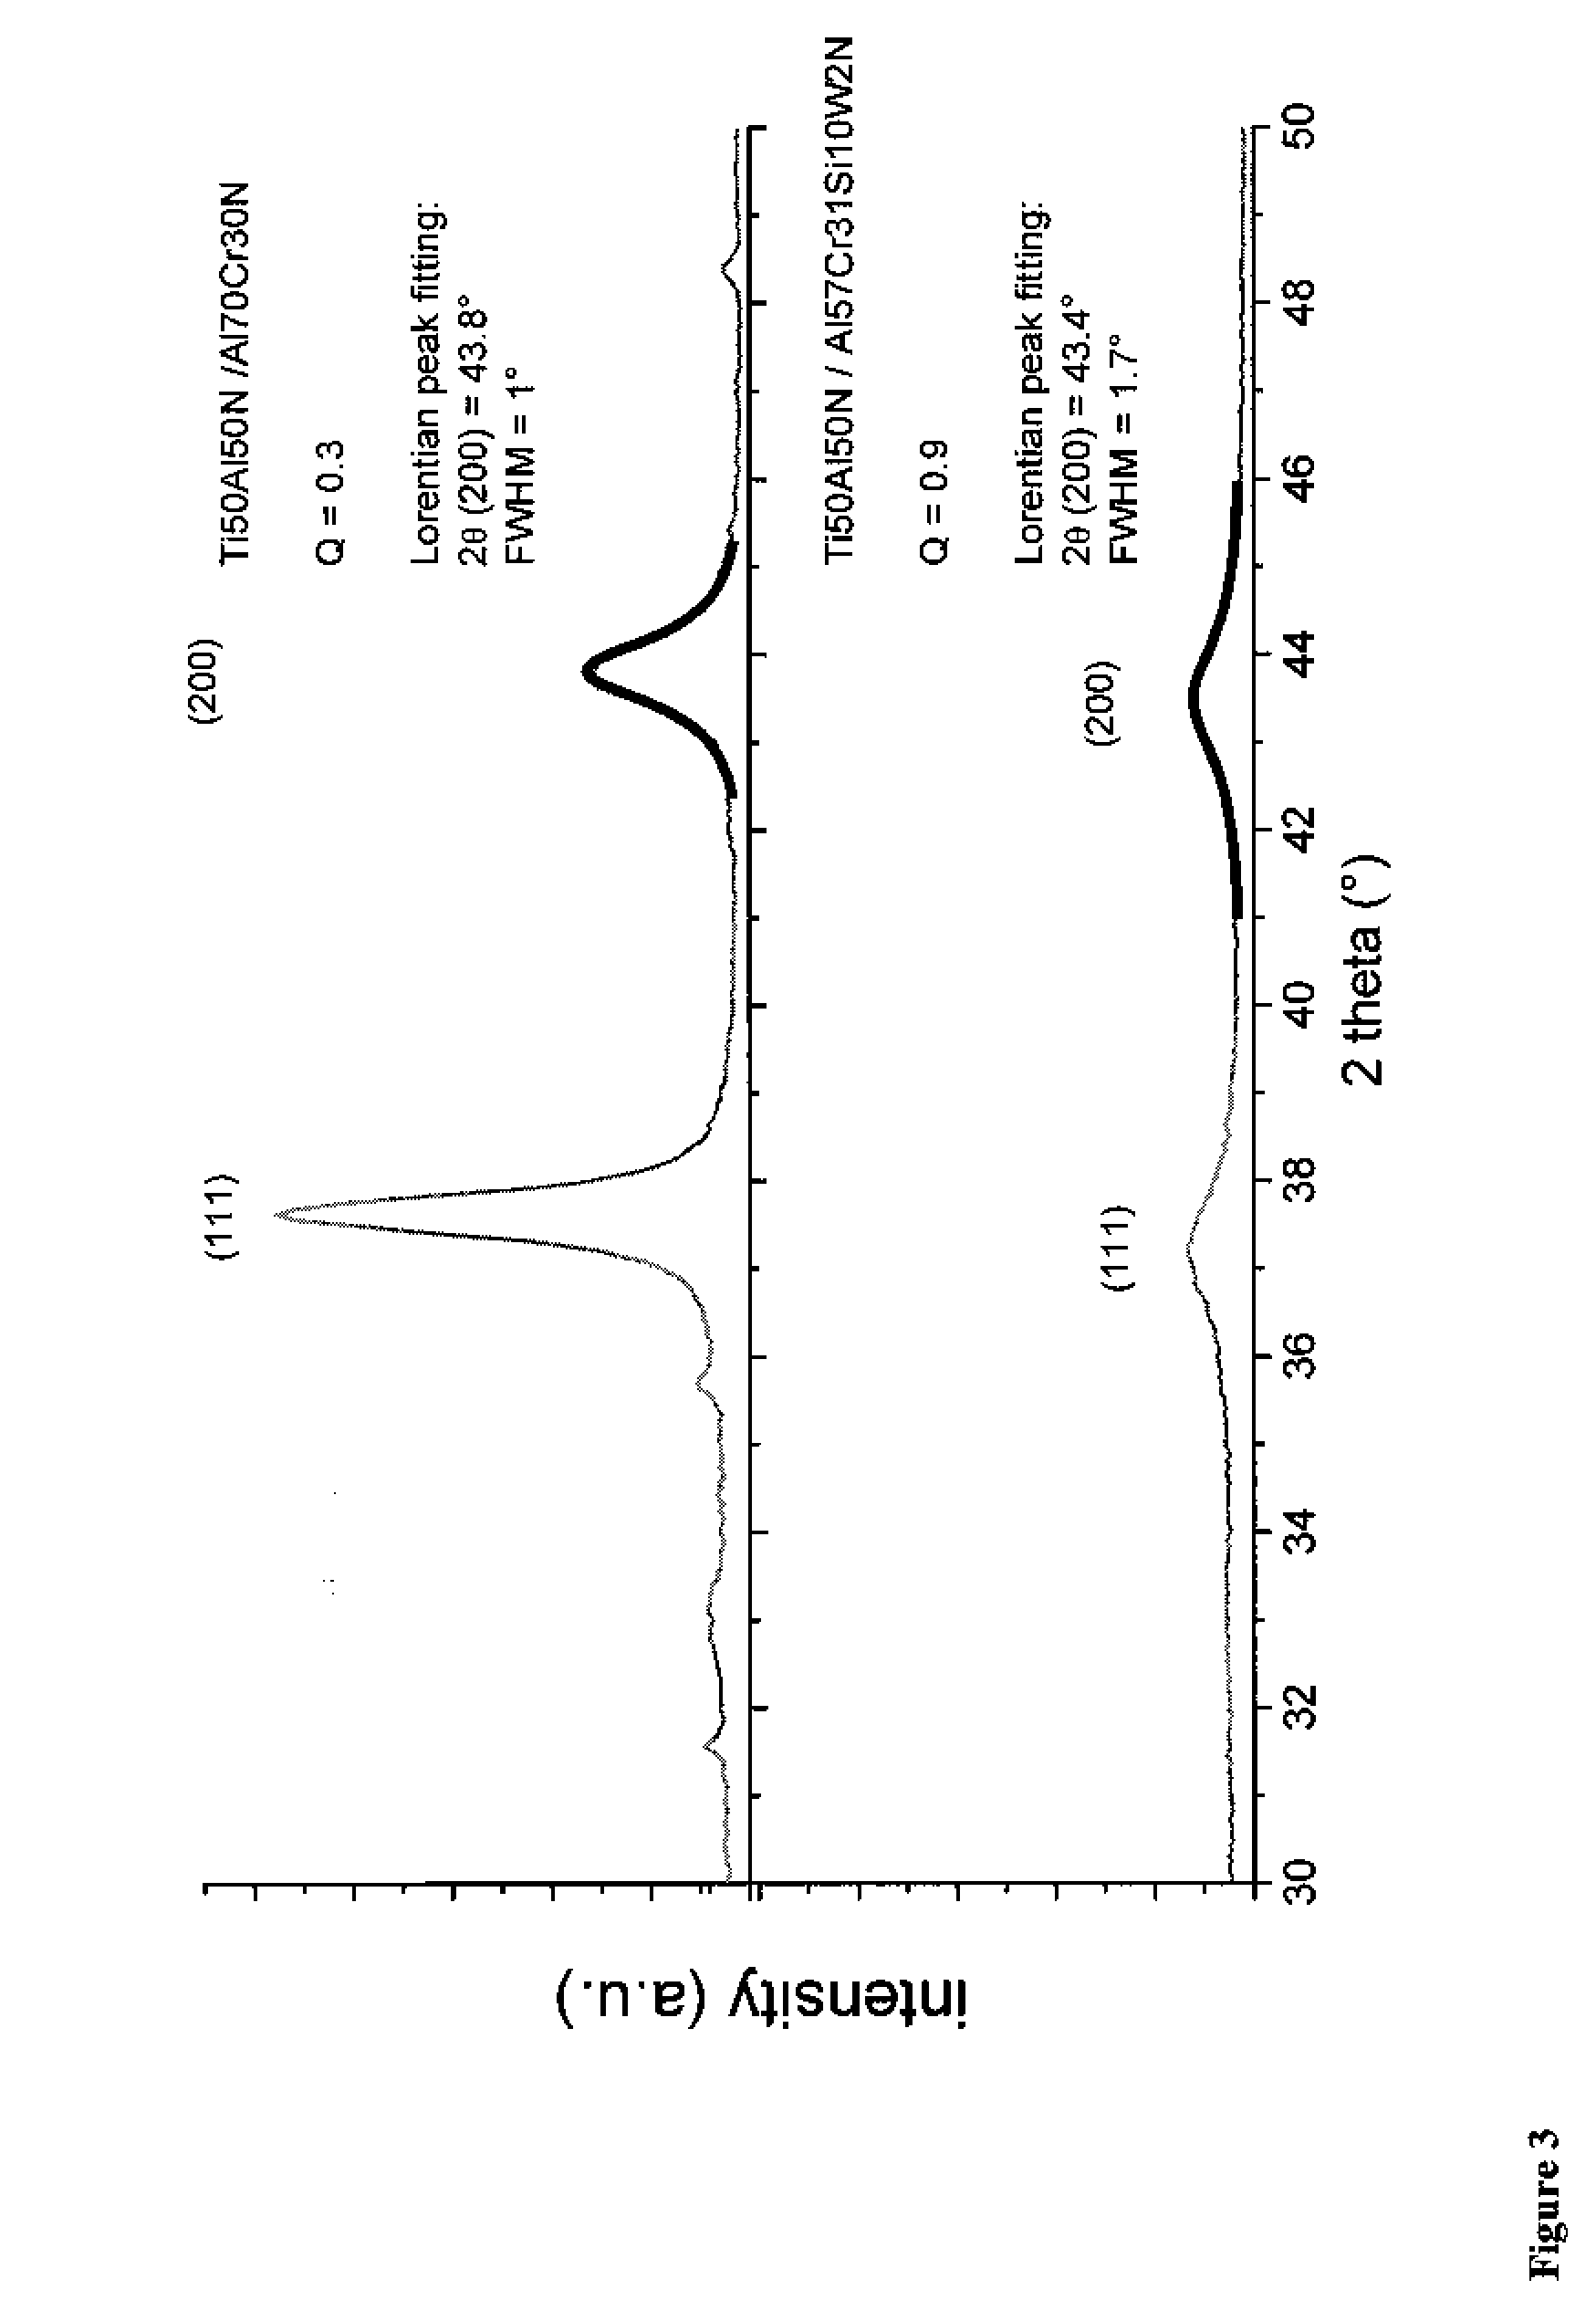 Wear resistant hard coating for a workpiece and method for producing the same